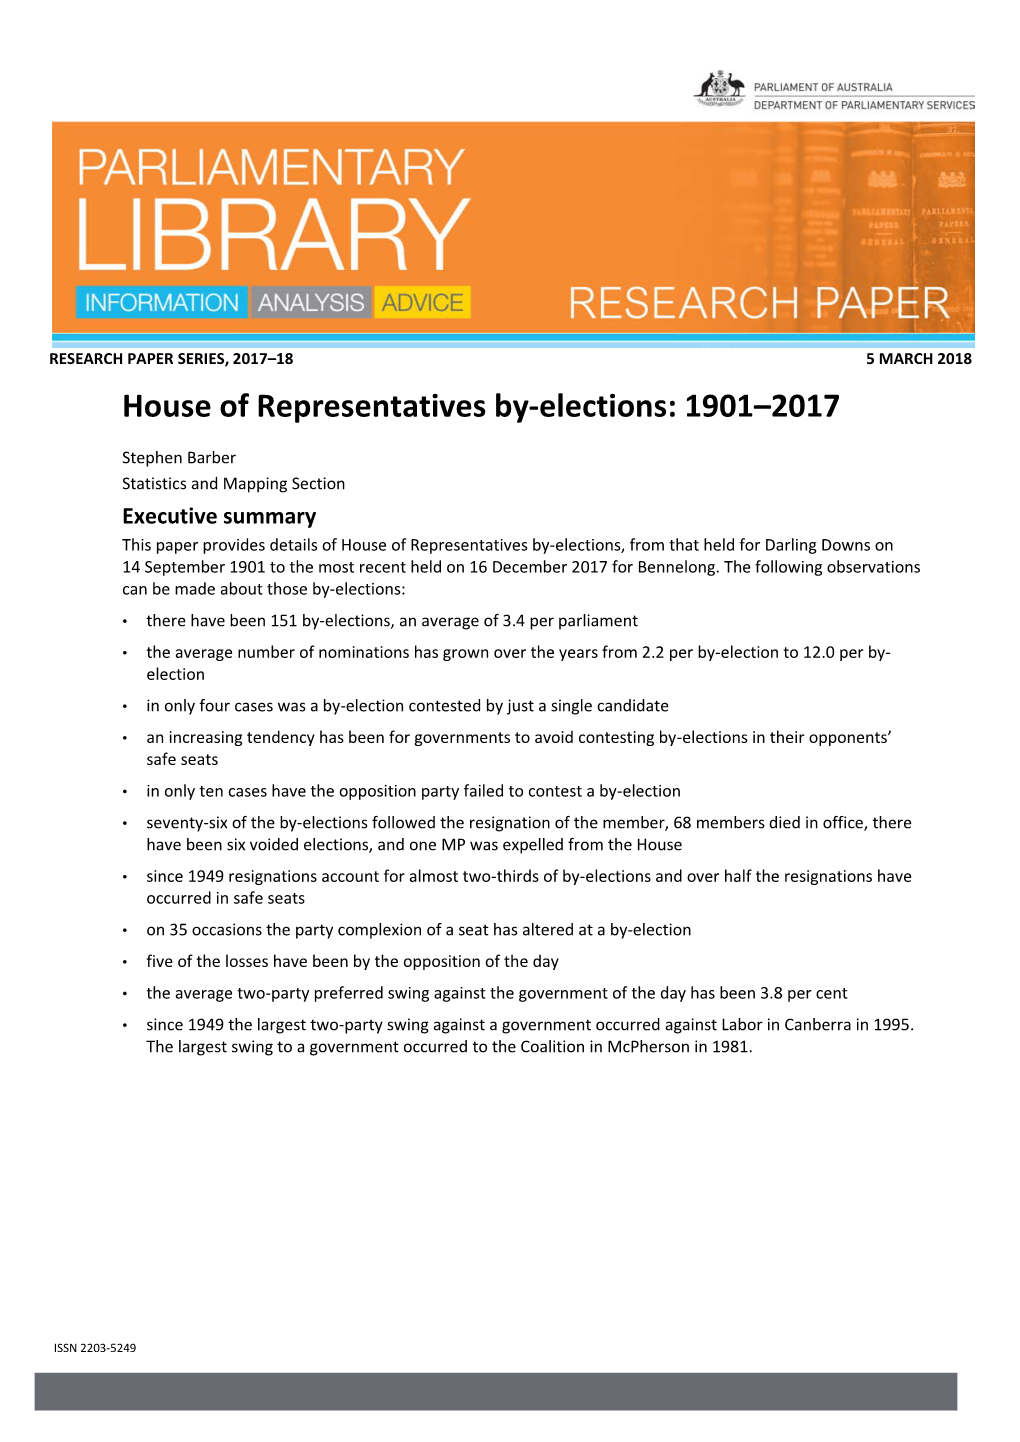 House of Representatives By-Elections 1901–2014